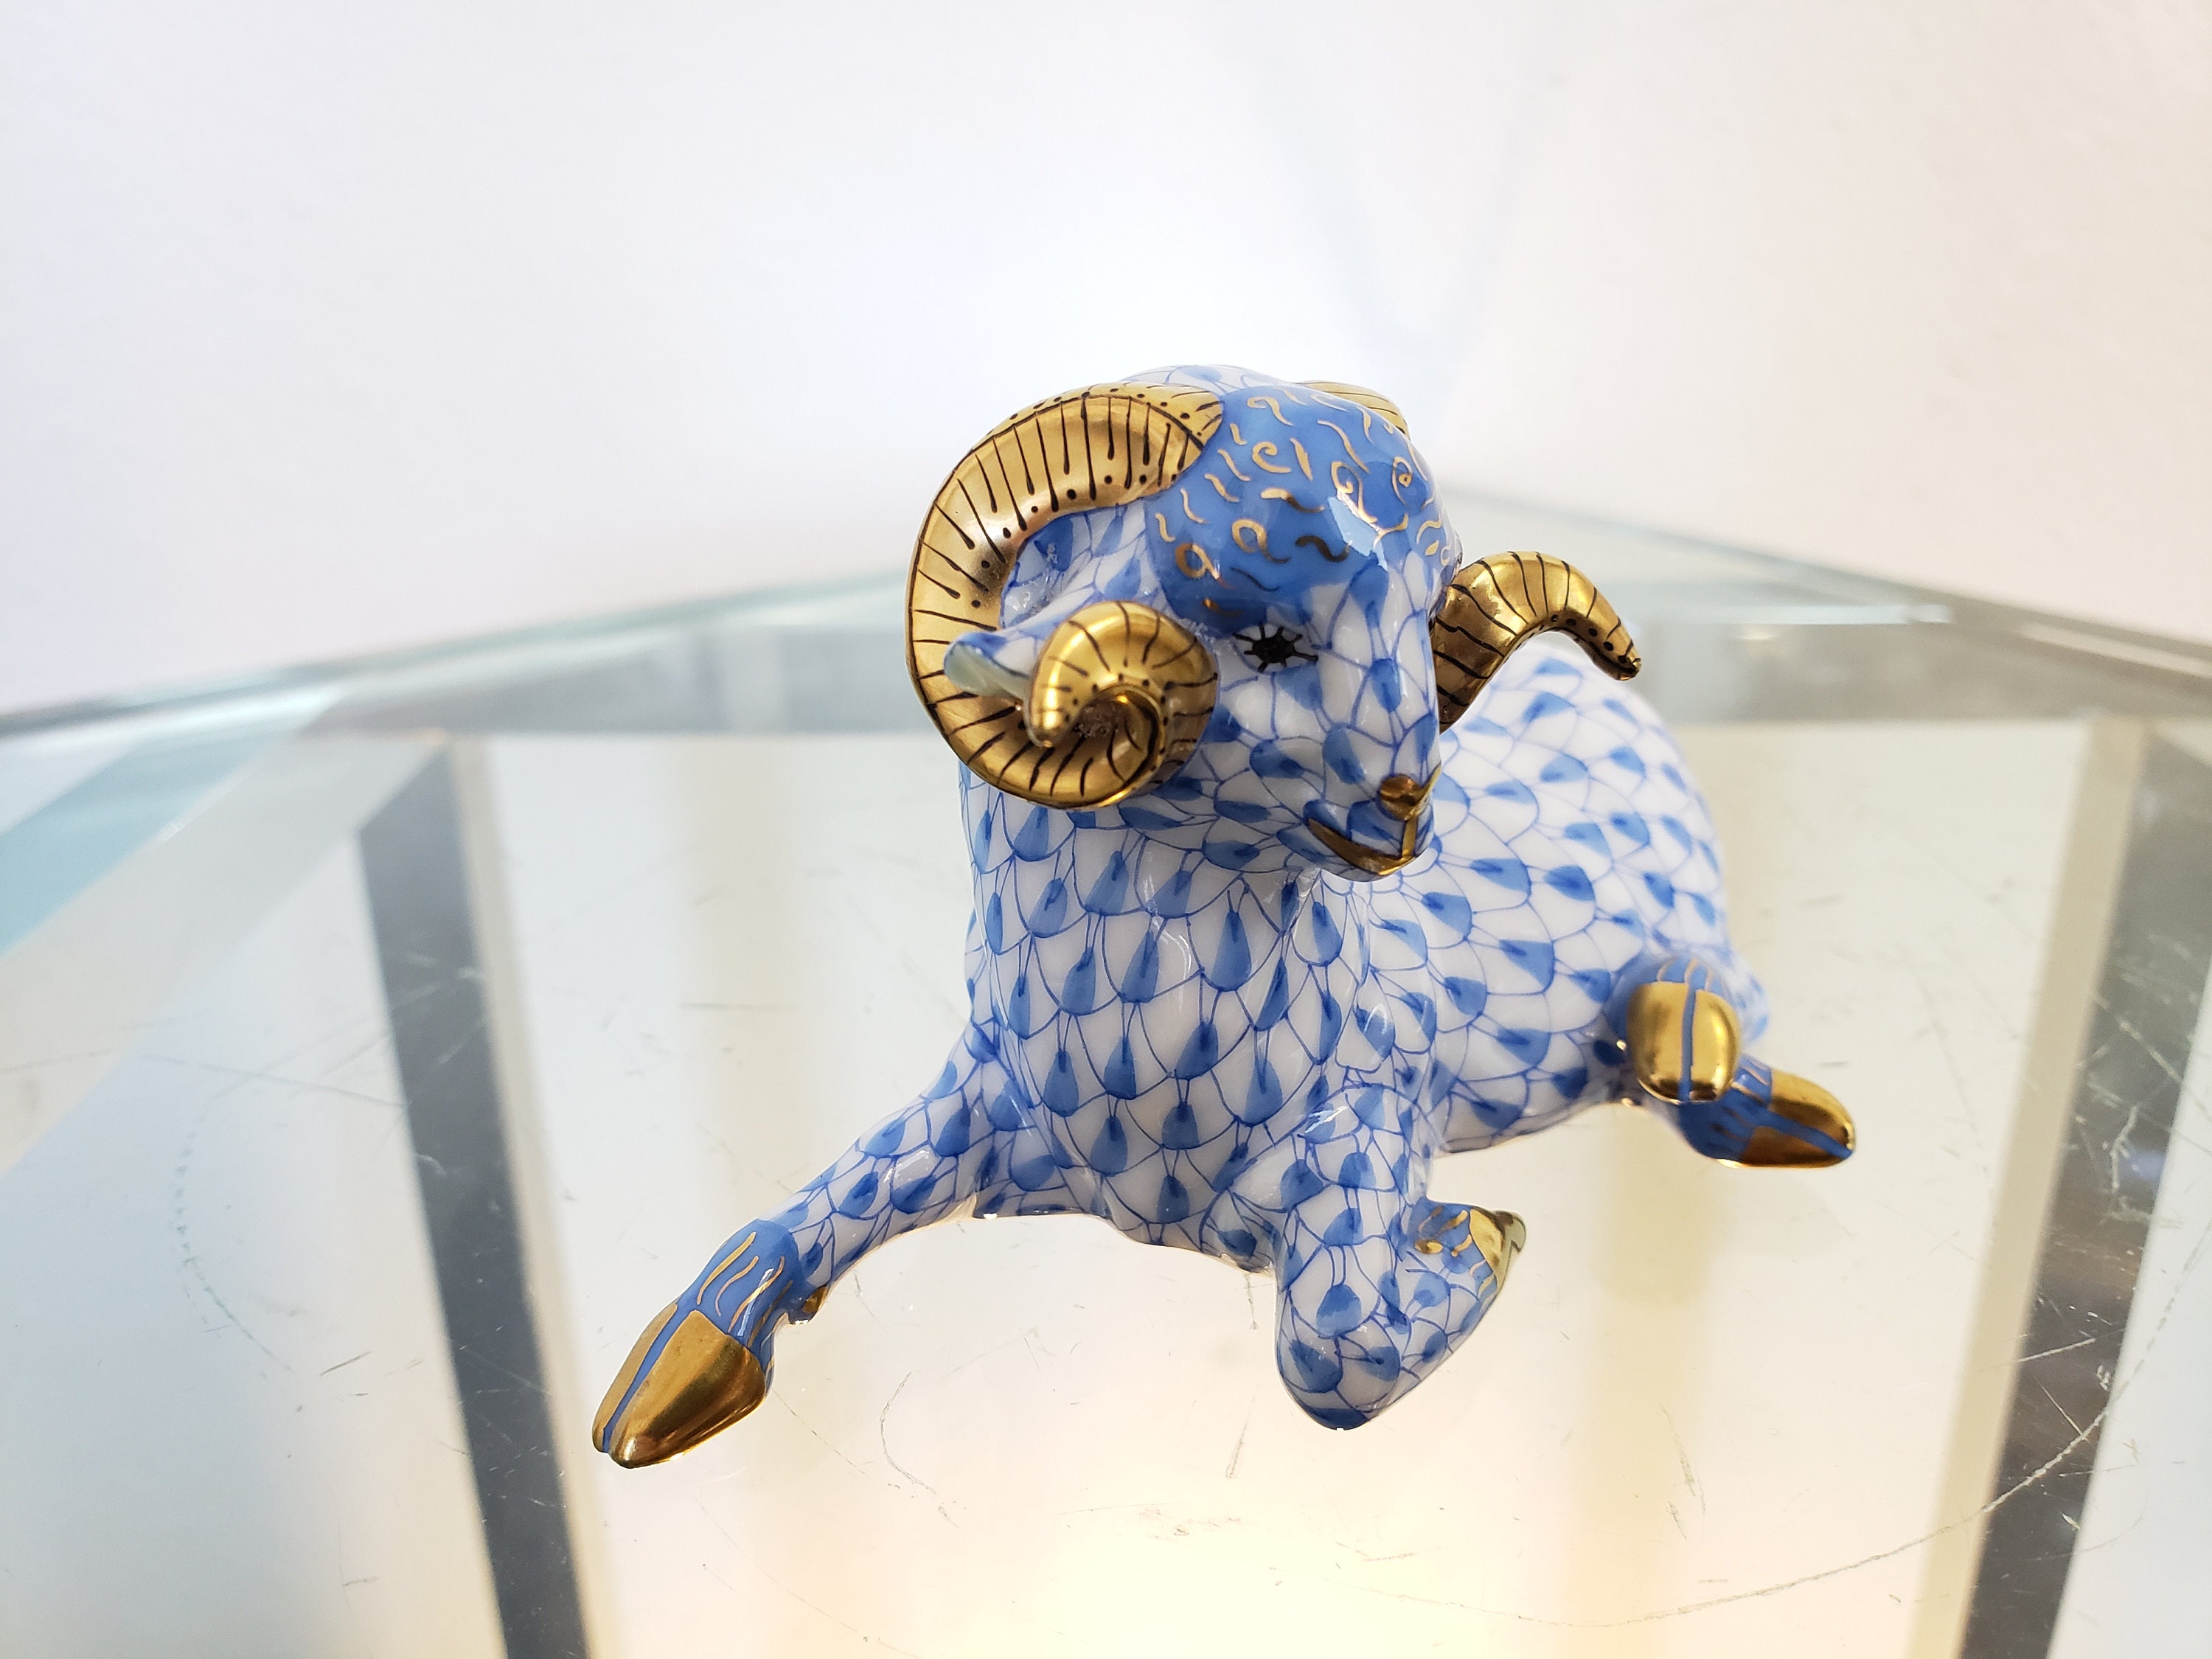 Herend Fishnet Ram Sheep/Blue Porcelain Of Hungary Luxury Gifts 24K Gold Accents Vintagesouthwest